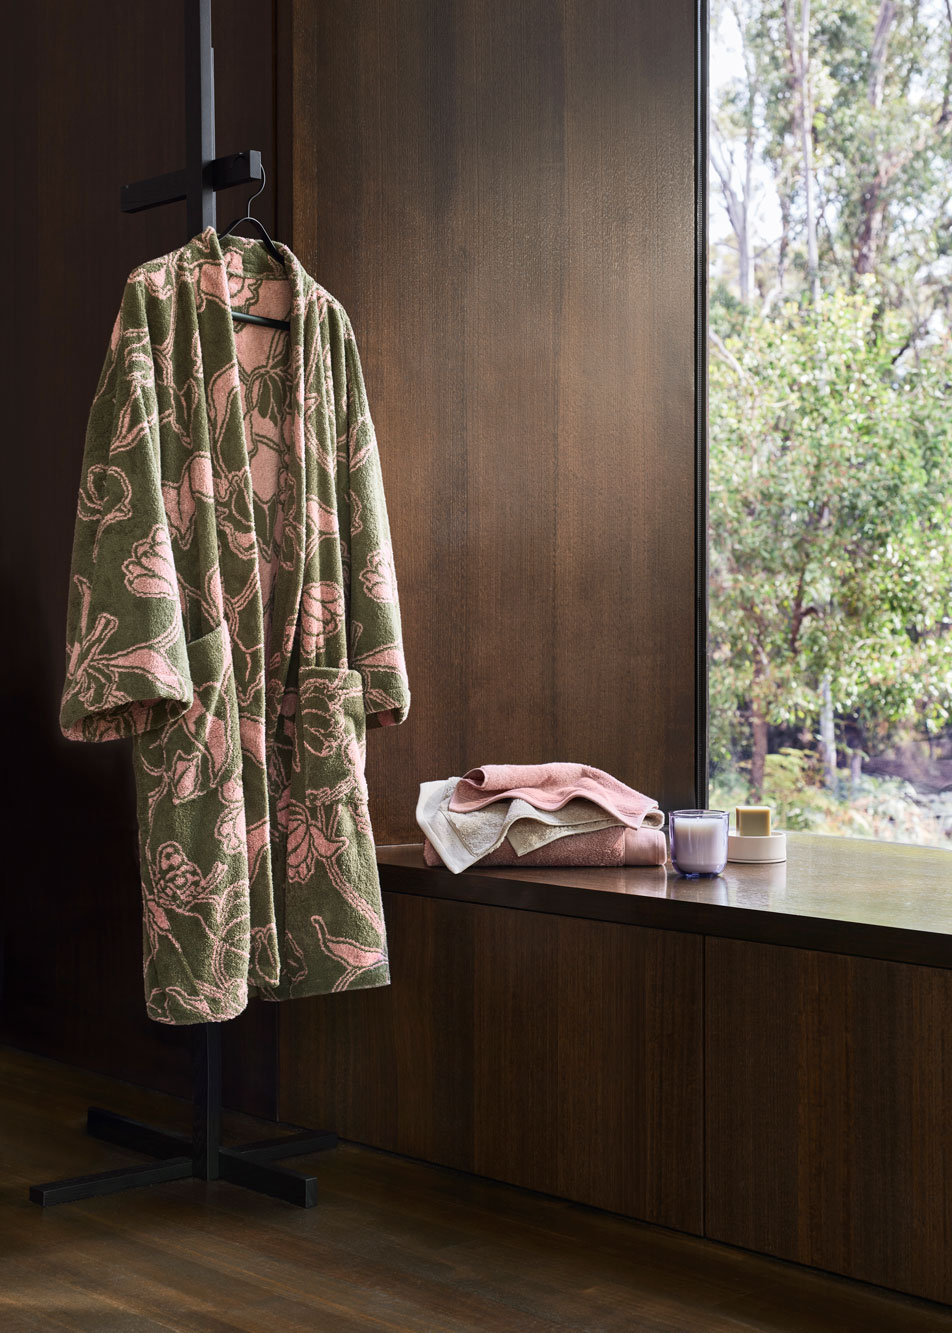 A modern, dark timber bathroom. A green and pink floral robe hangs from the wall, next to a stack of towels and a candle on the windowsill.